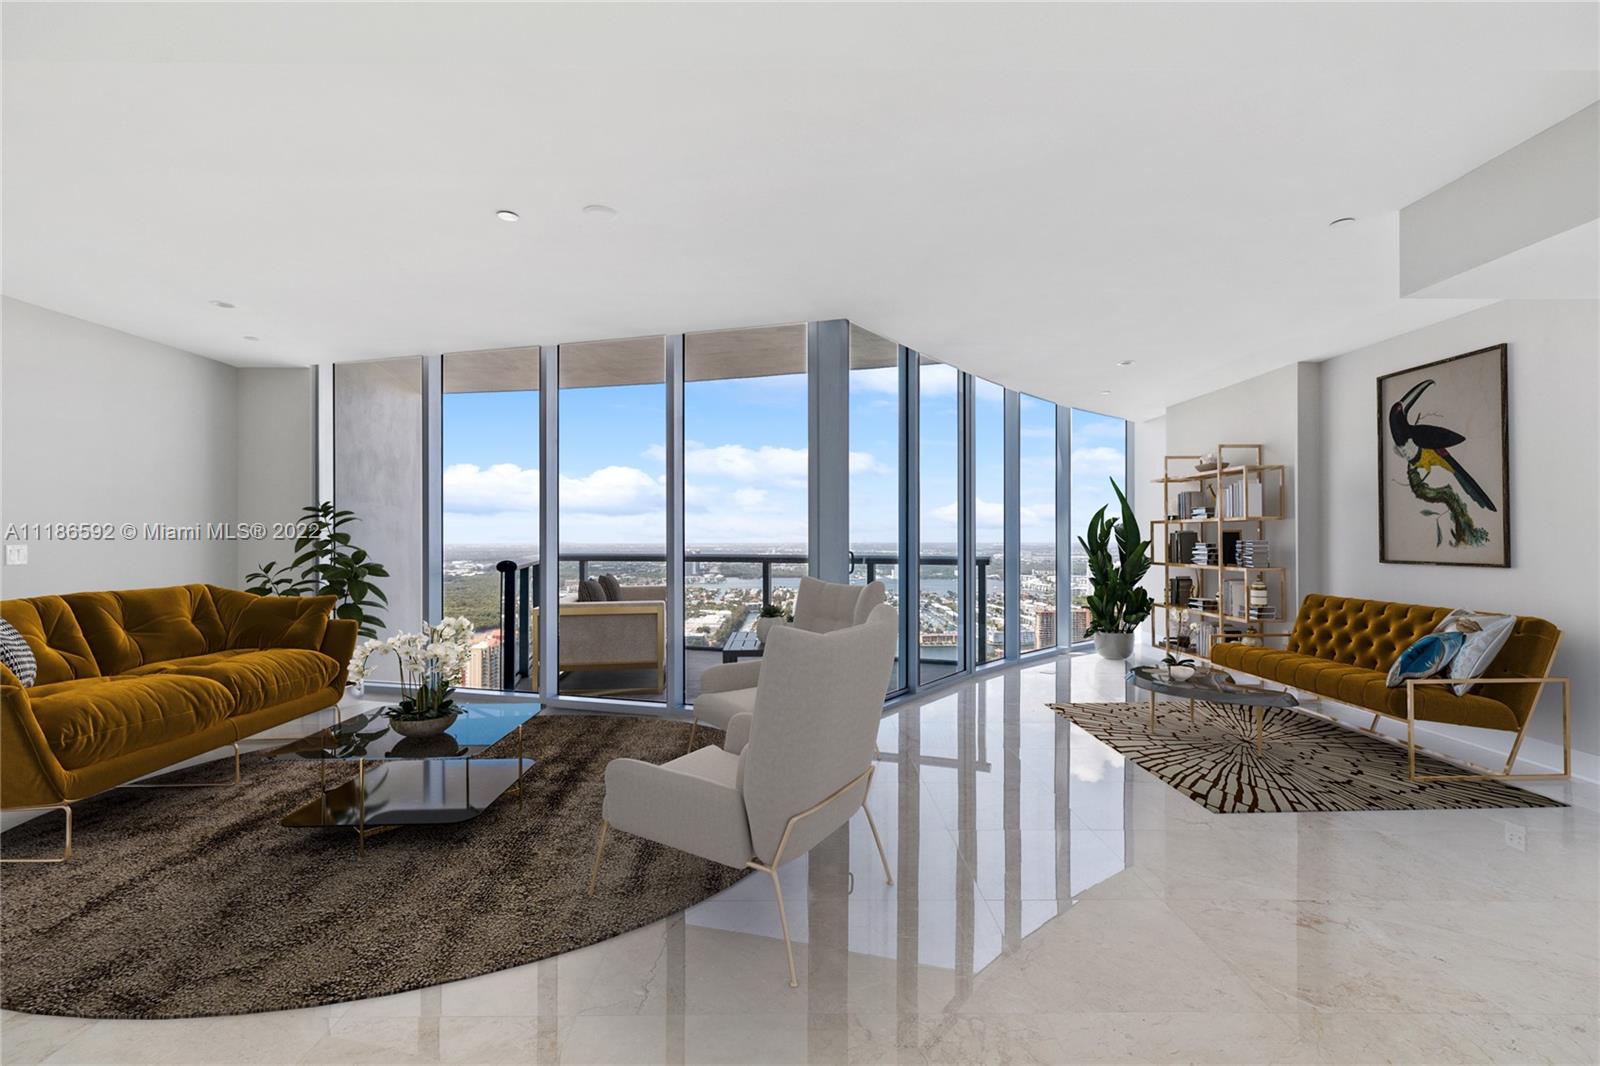 Stunning East and West views from this Tri-Level Penthouse in Sunny Isles Beach!!! This magnificent unit features high ceilings, 5 bedrooms and 6.5 bathrooms with marble and wood floors, and top-of-the-line European designer fixtures—approximately 5,000 sq ft in balconies and terraces. Great amenities include a fitness center, world-class spa, ocean-front pool deck, 24/7 concierge, and valet parking.